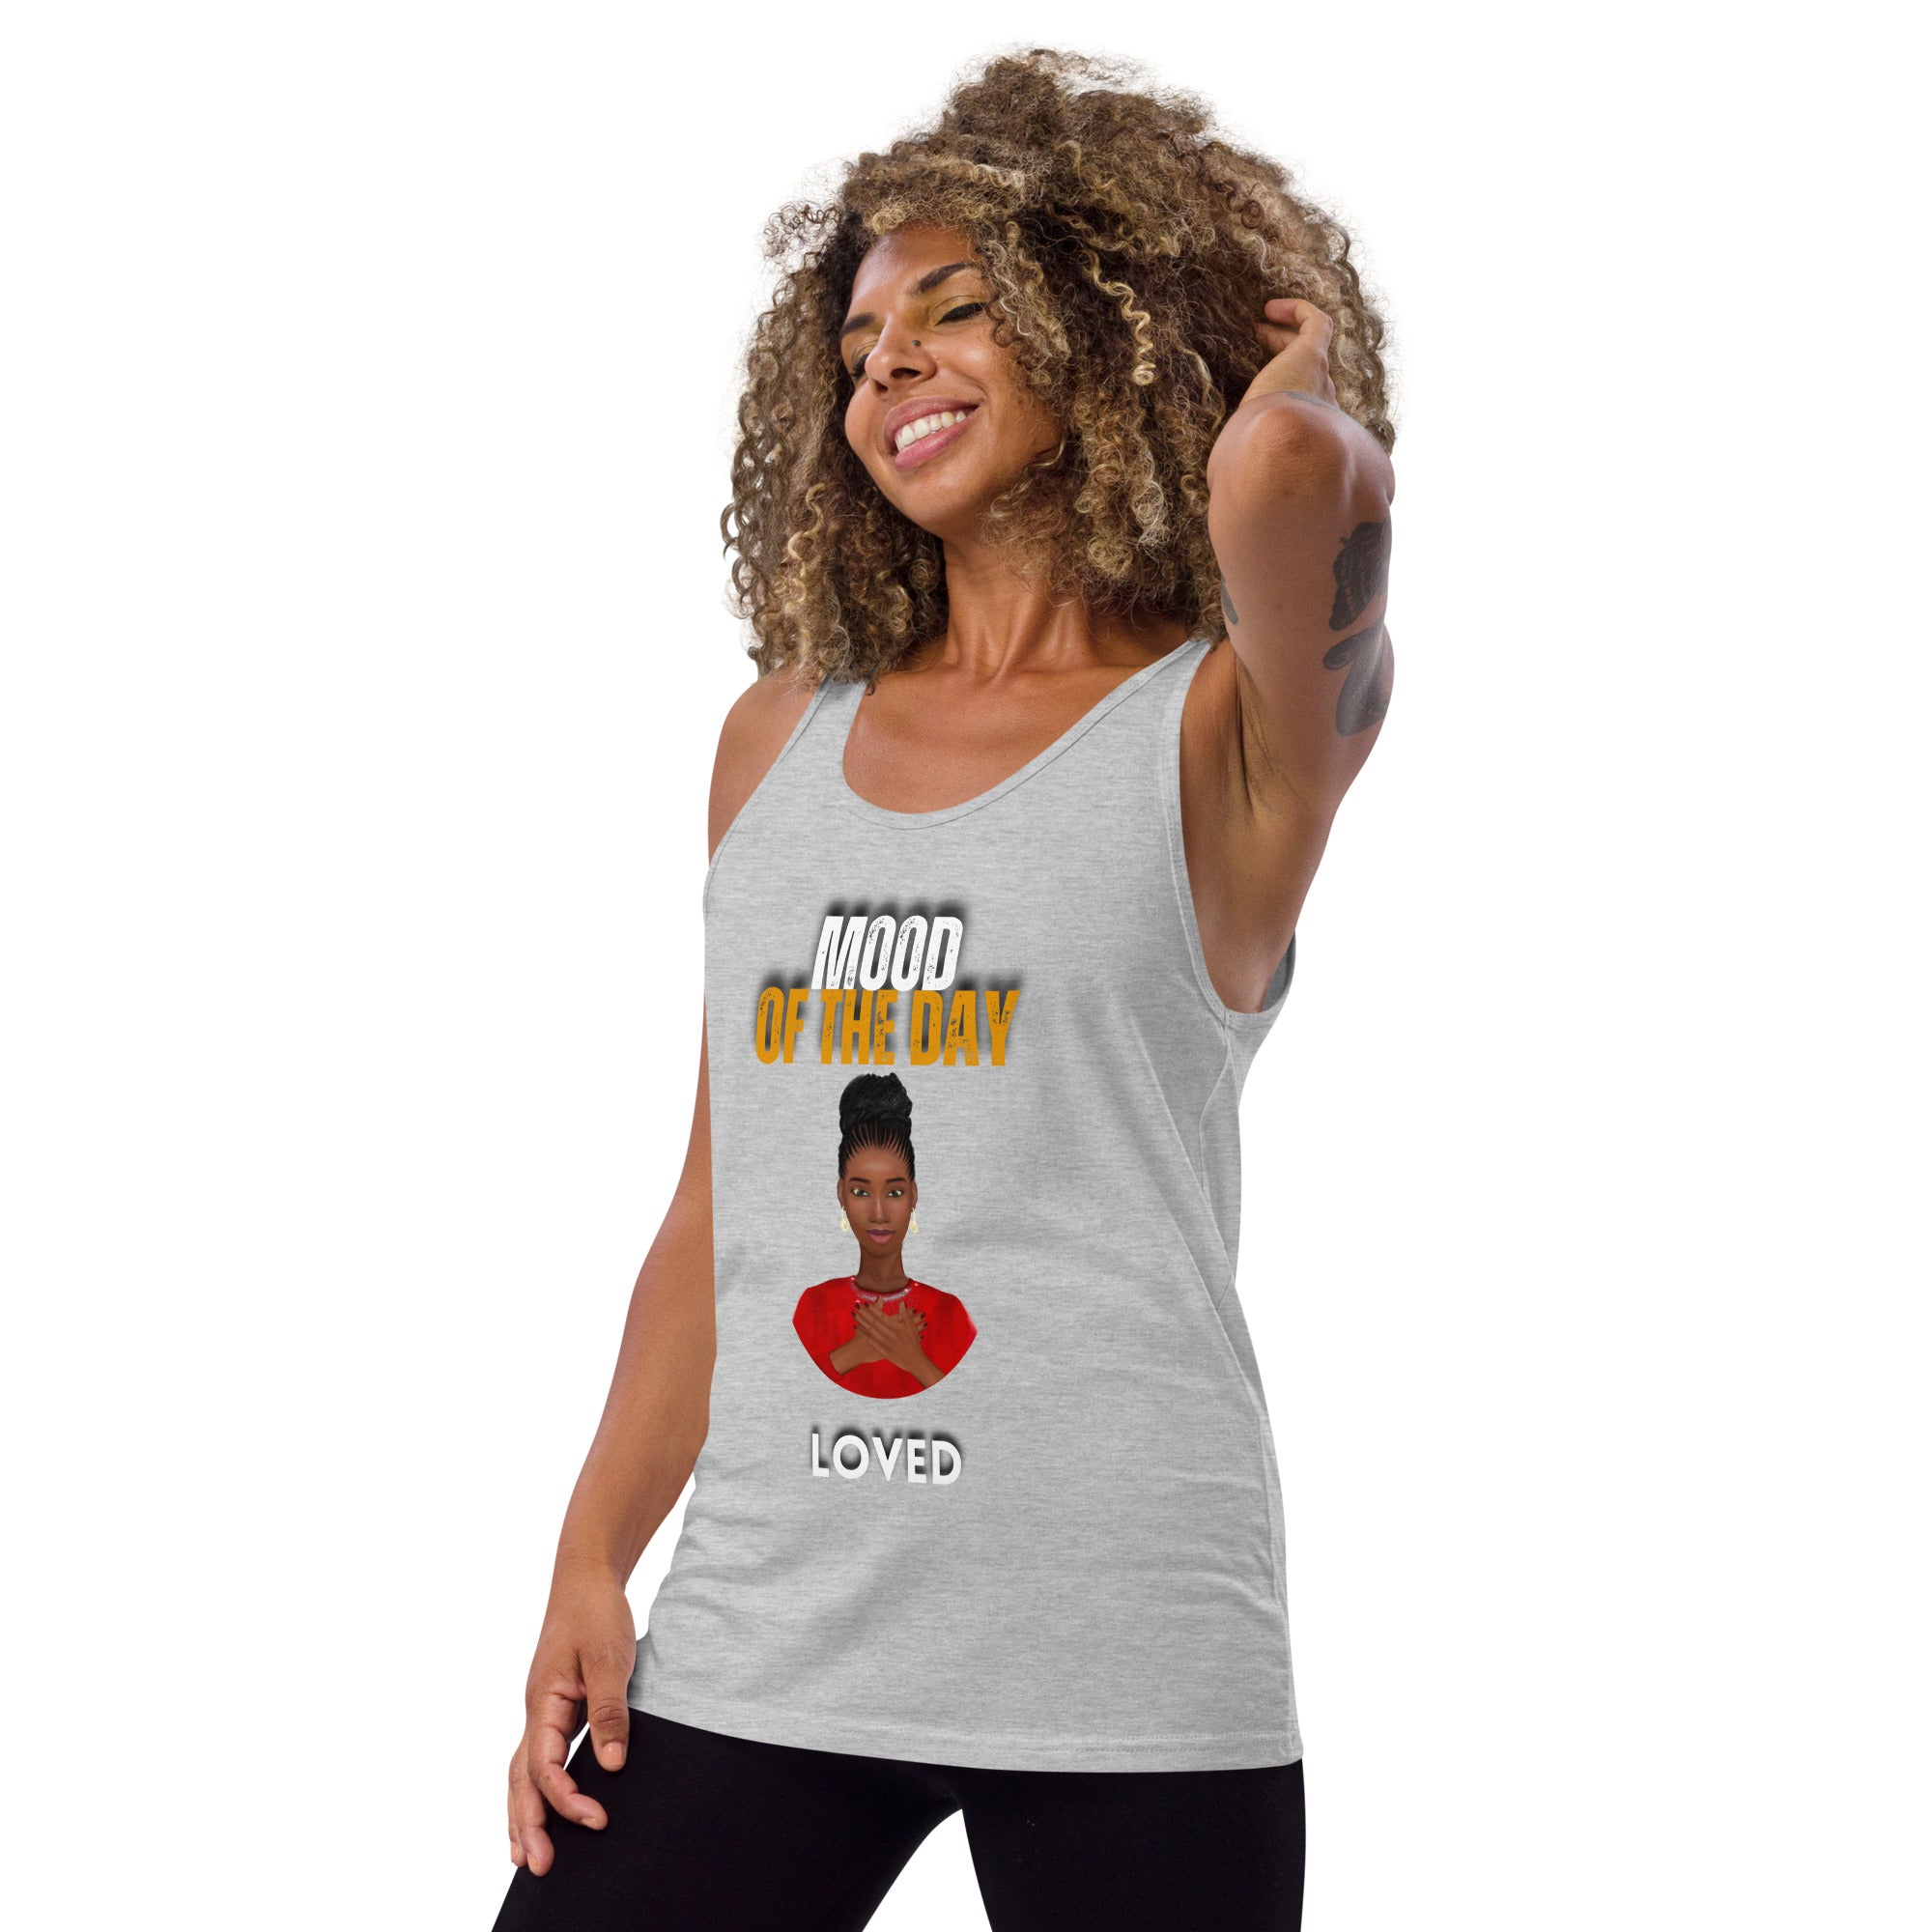 Mood of the Day Tank Top - Loved (Black Woman)